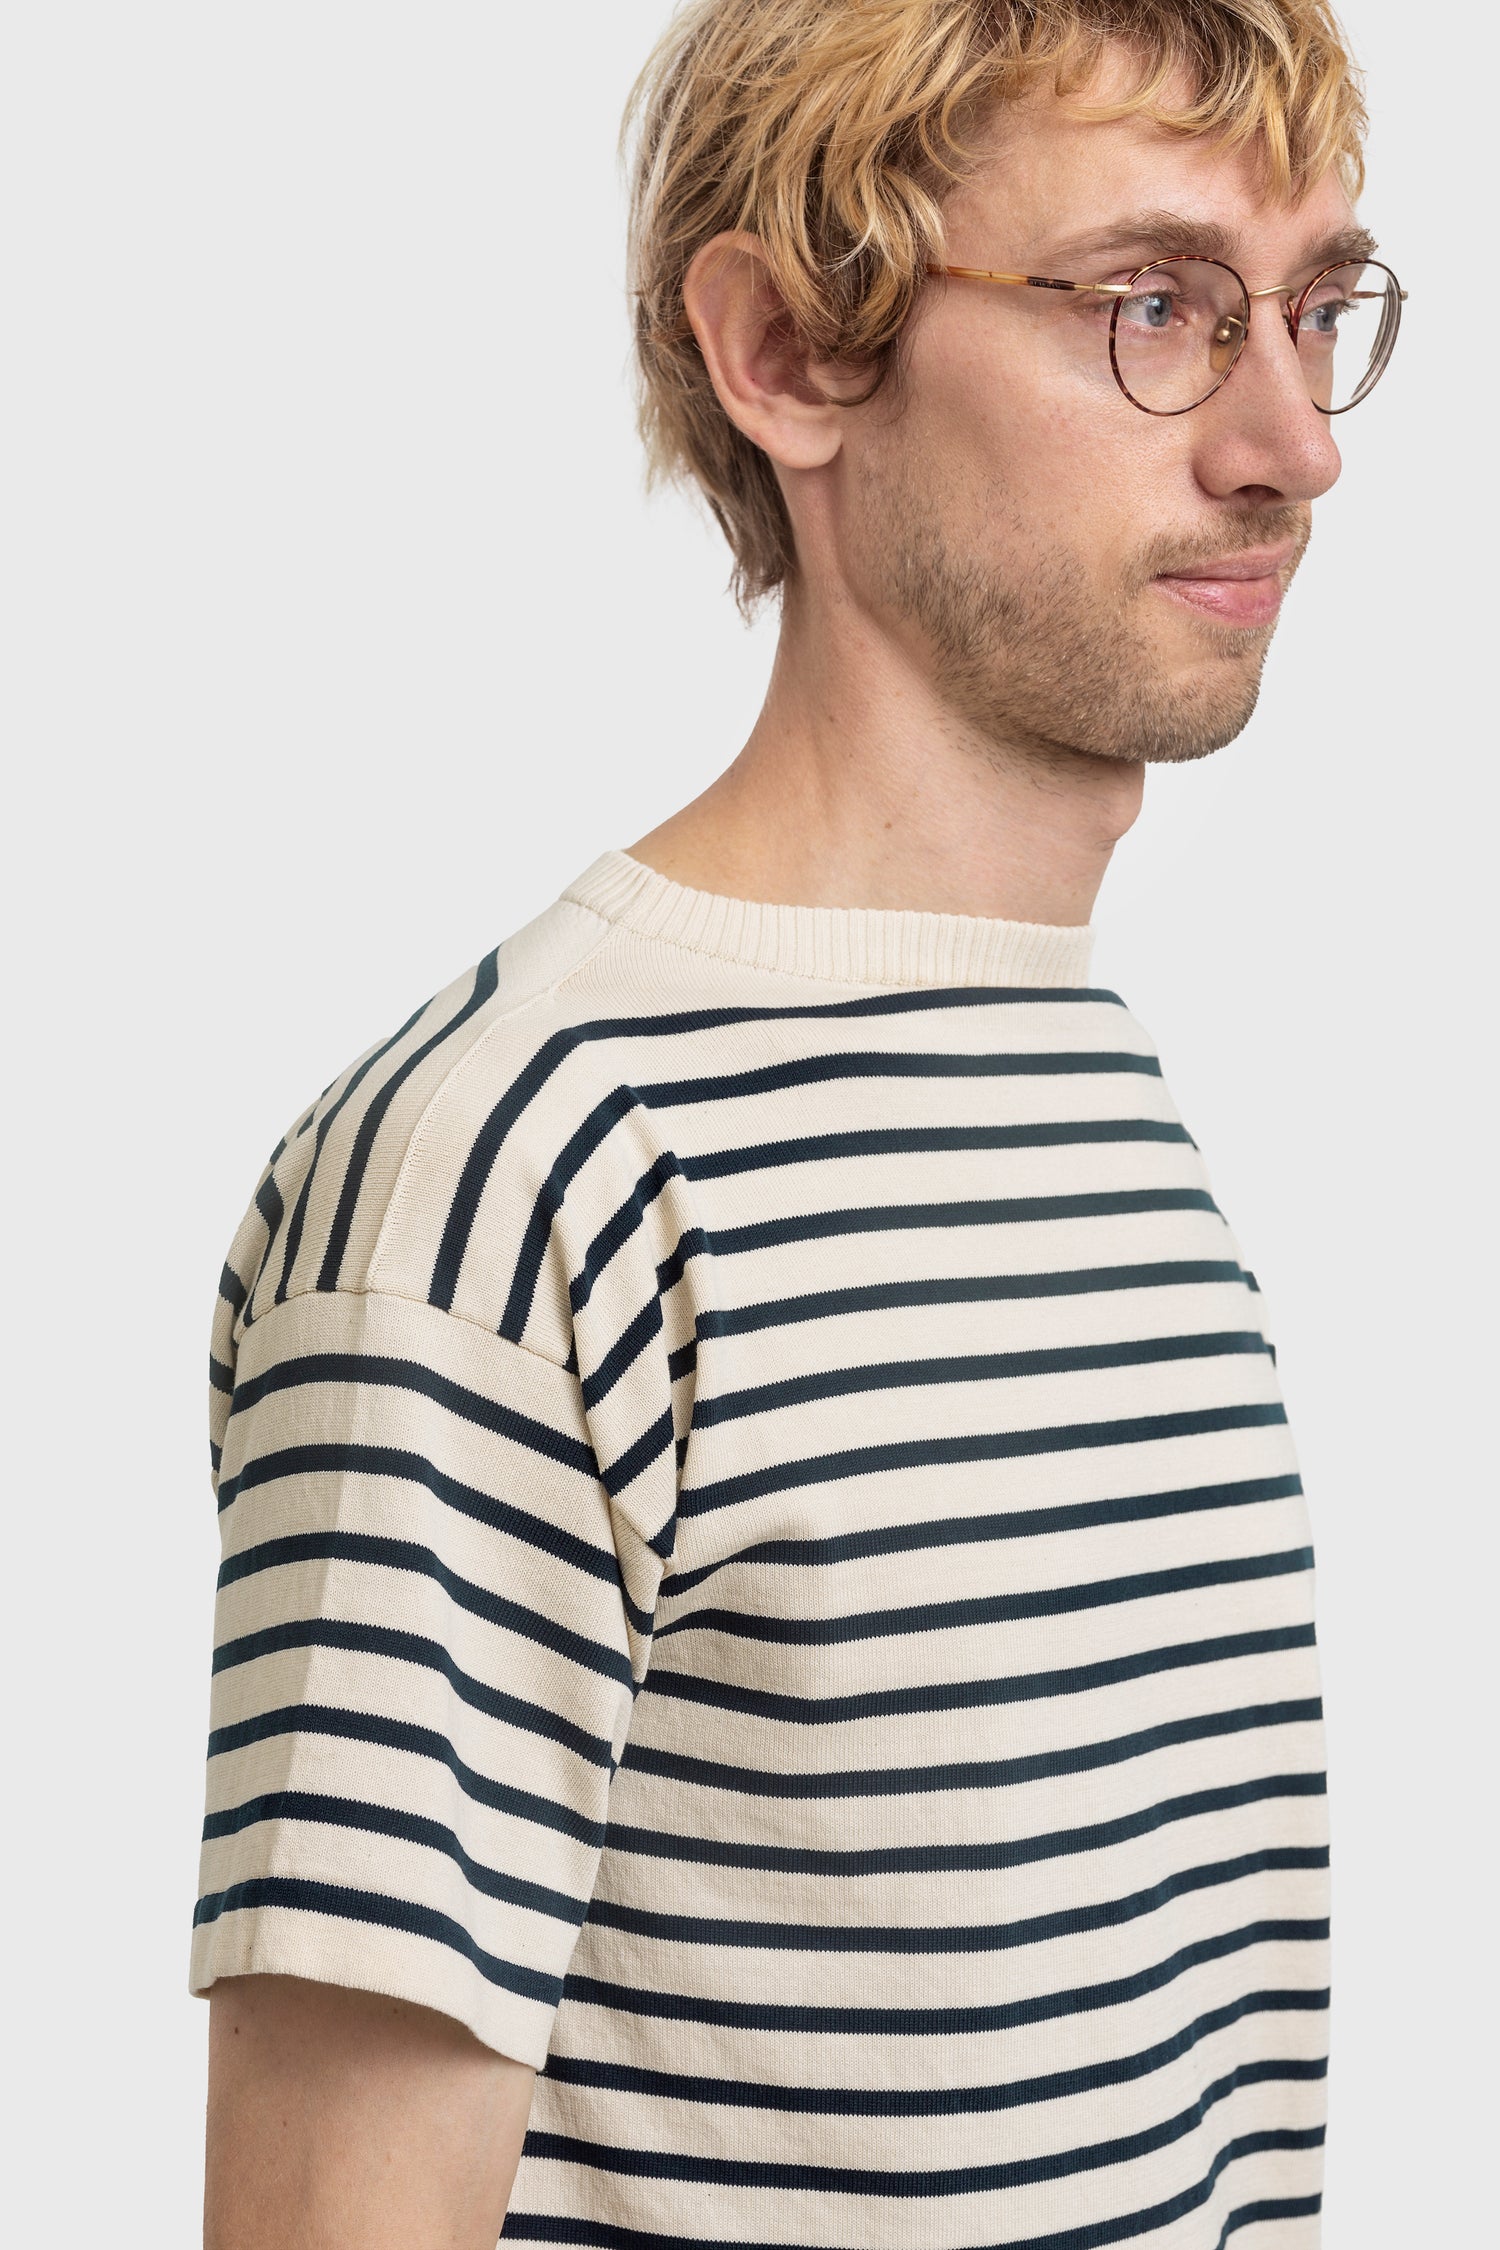 Jens Peter wearing Boatsman Short in Raw Cotton with Royal Blue stripes 